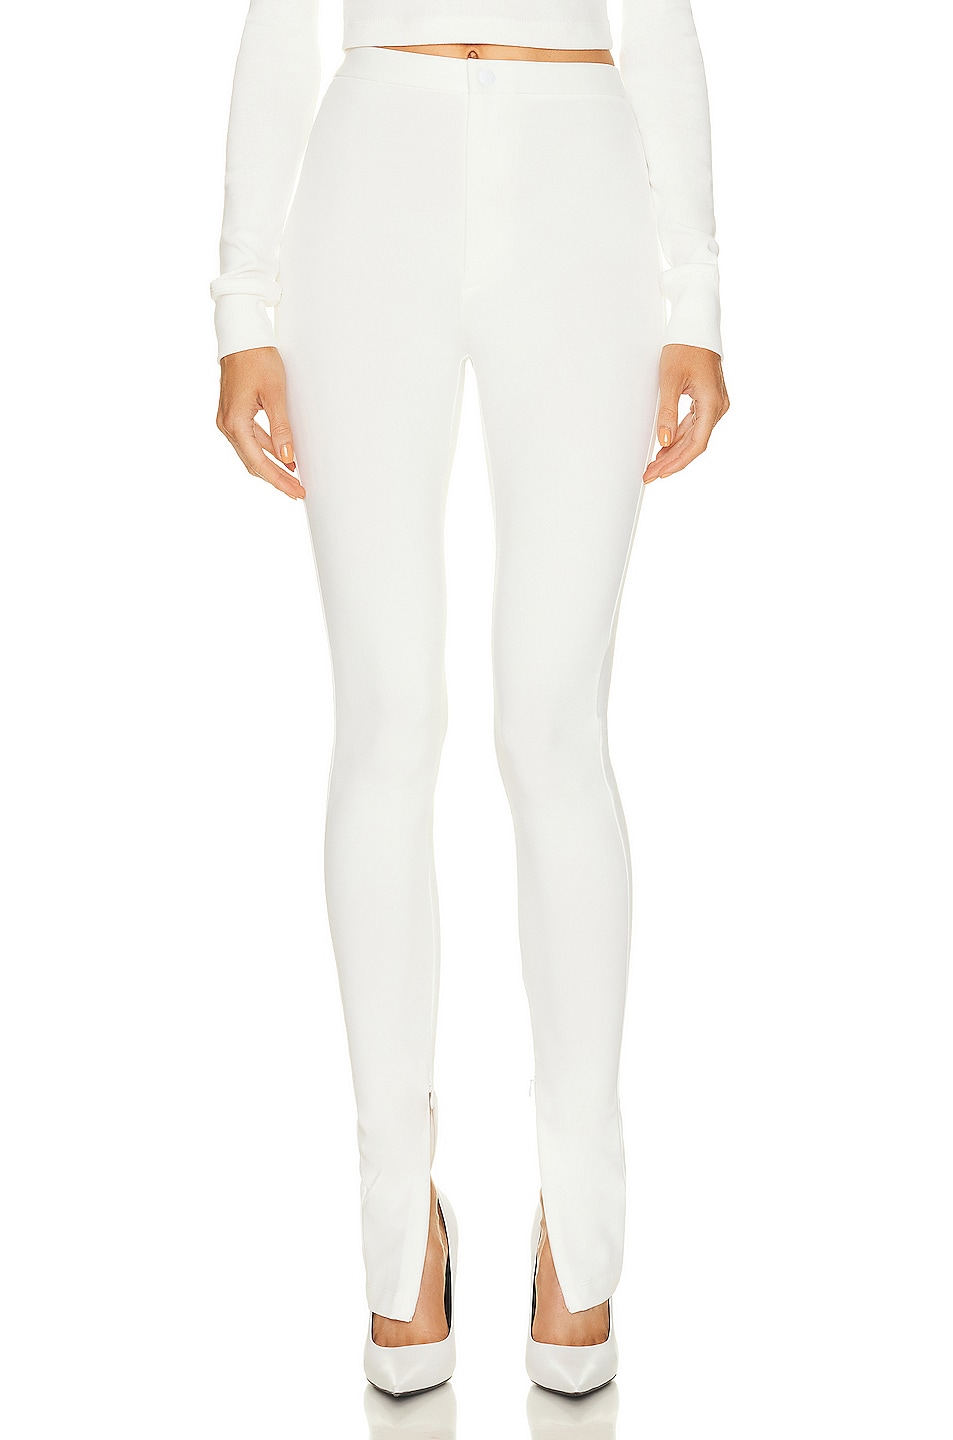 Image 1 of WARDROBE.NYC x Hailey Bieber HB Legging in Off White